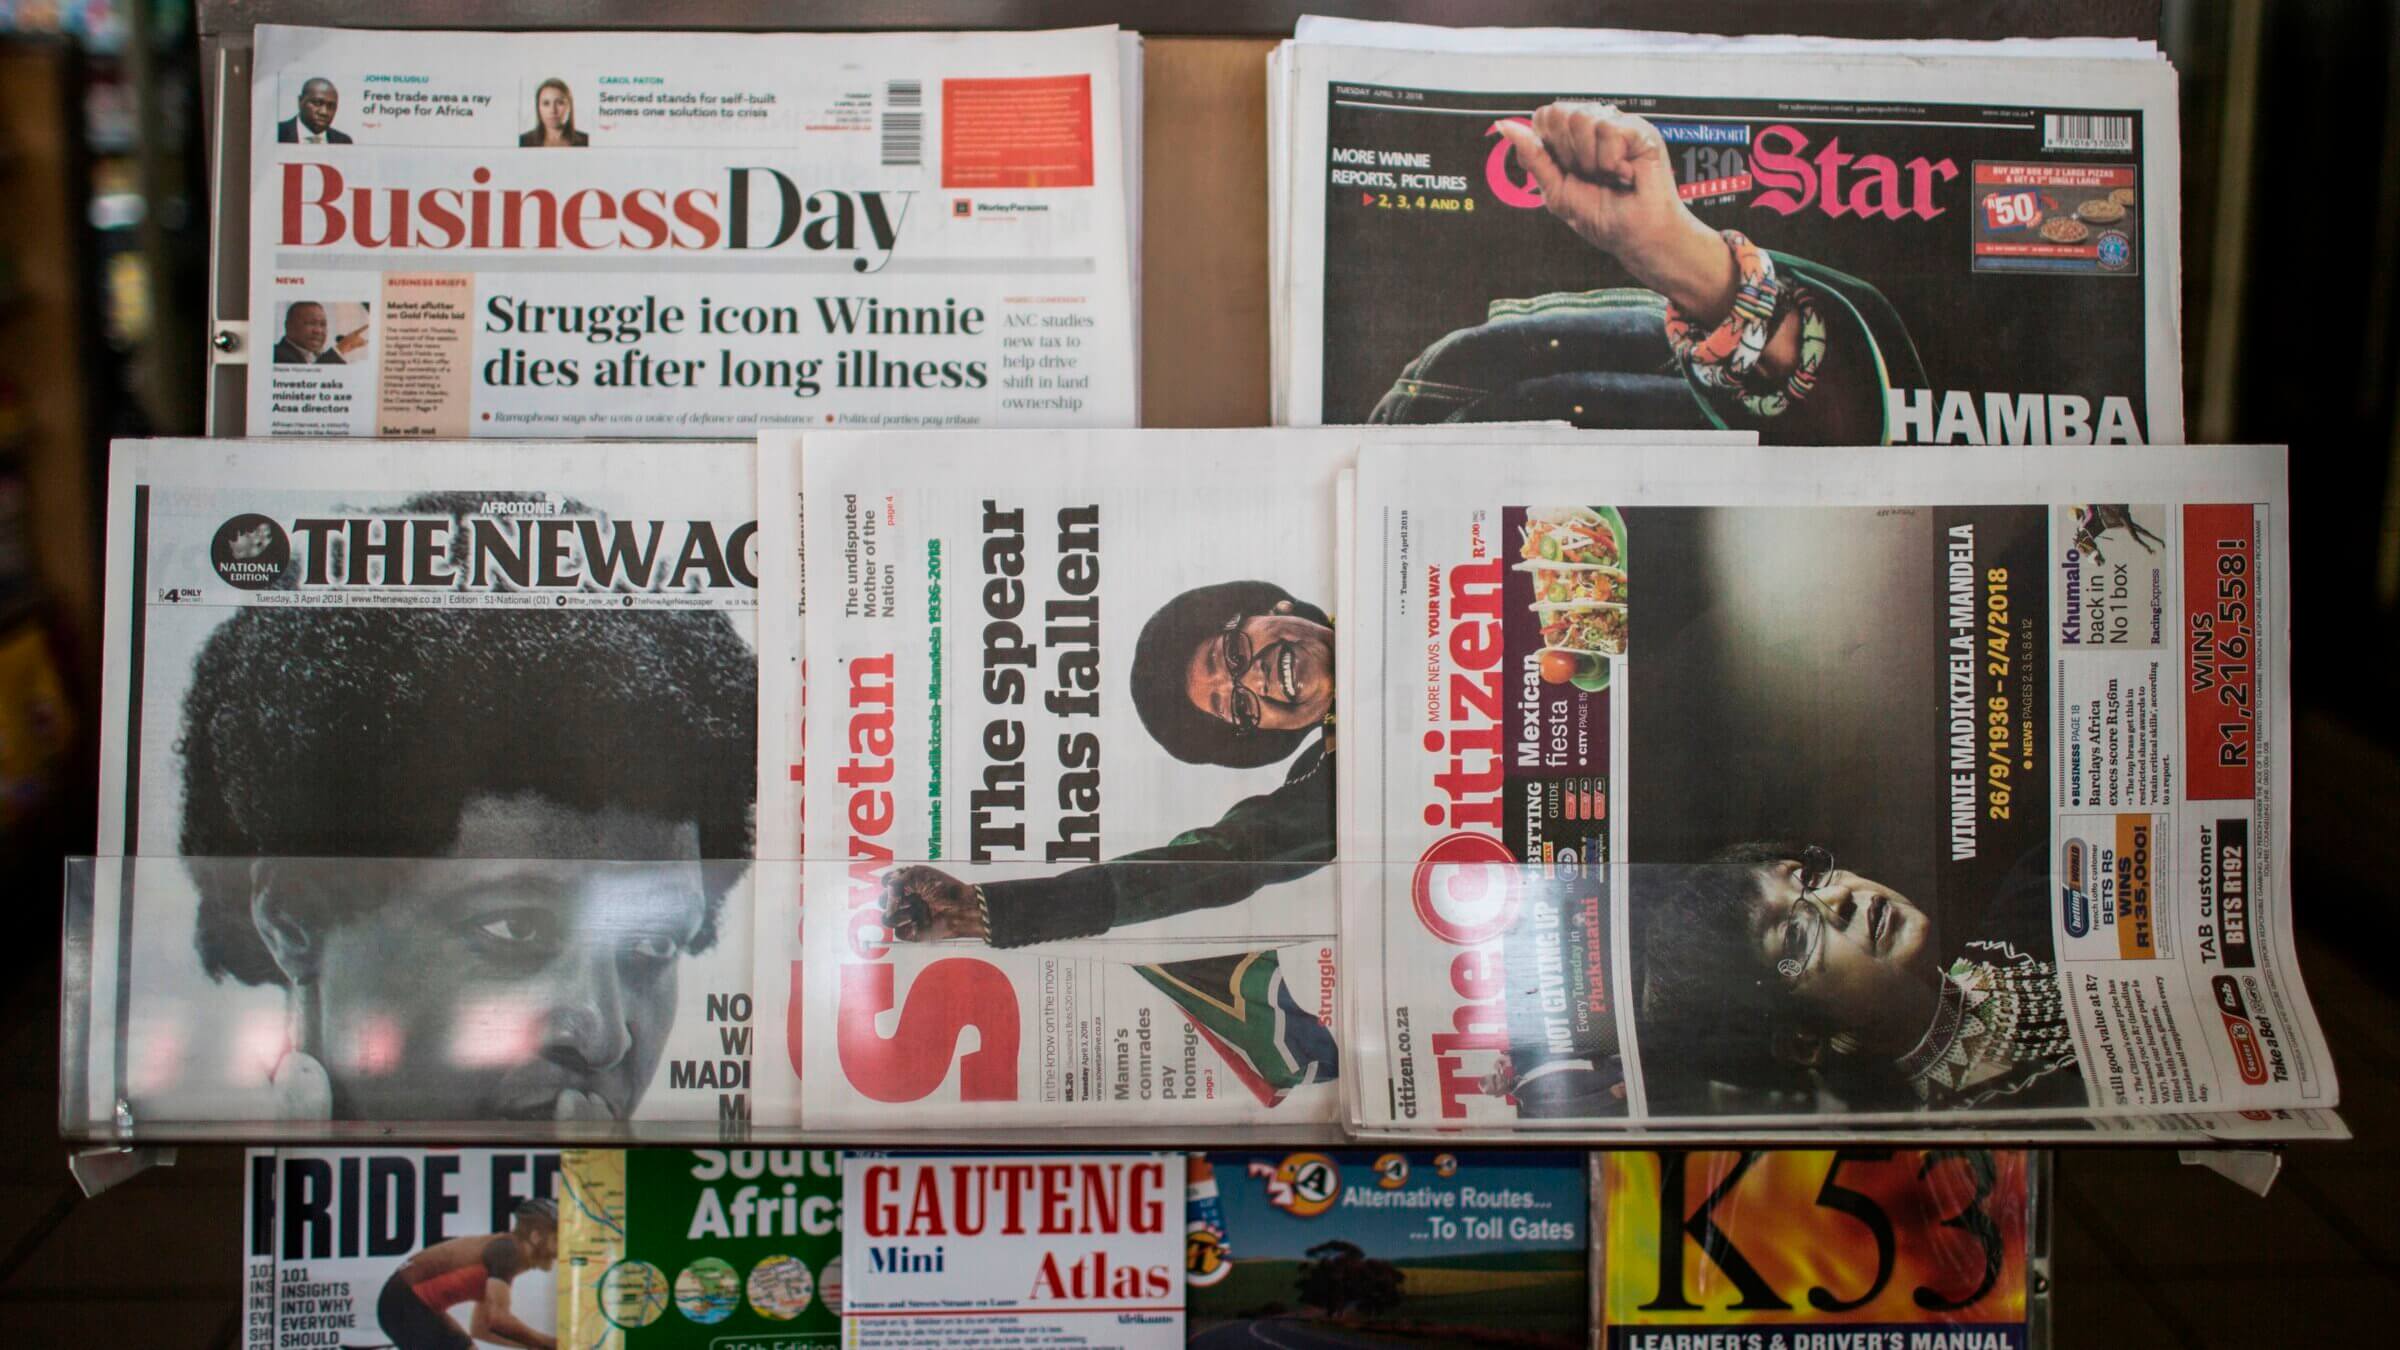 The Press Council South Africa, which regulates newspapers like those seen here following Winne Madikizela-Mandela's death in 2018, ordered the South African Jewish Report to apologize for describing a cartoon promoted by the SA BDS Coalition as antisemitic.